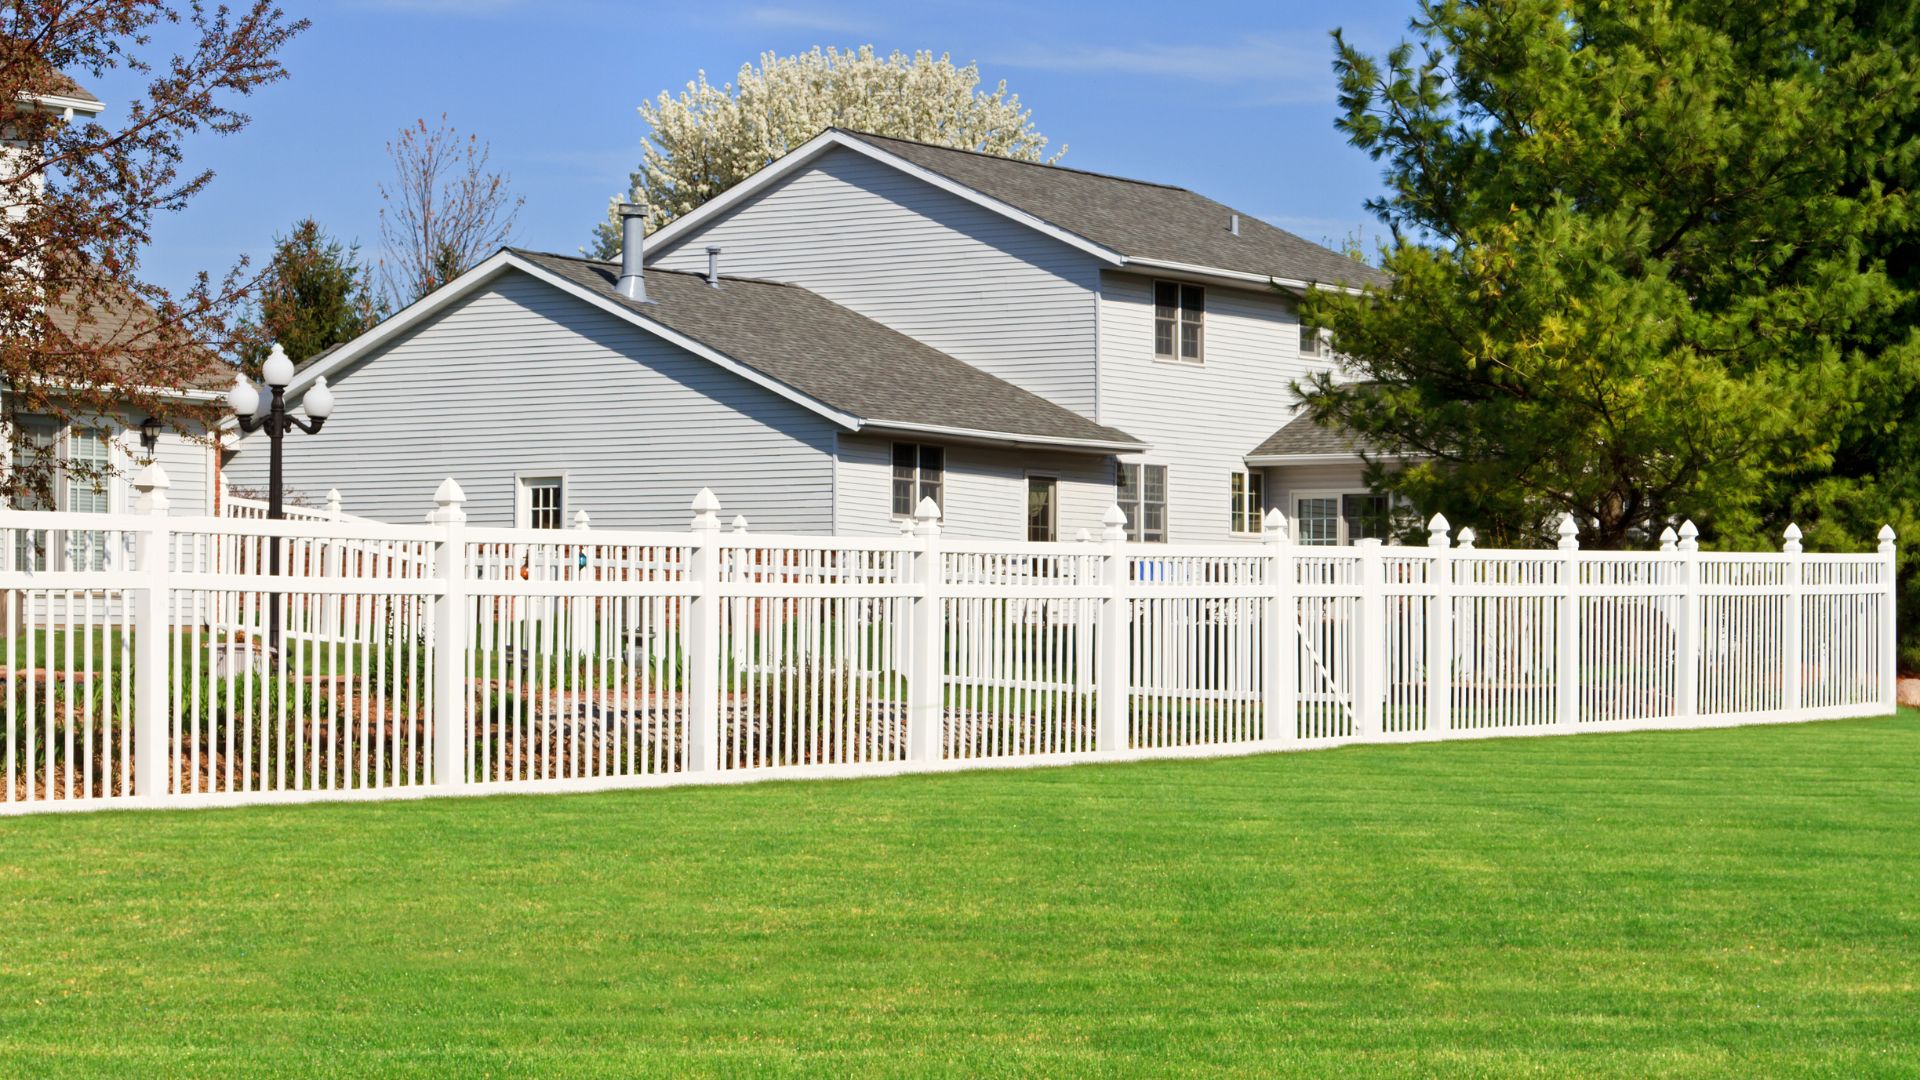 Top Fence Company in Vancouver, WA: Your Go-To Experts for Quality Fencing Solutions